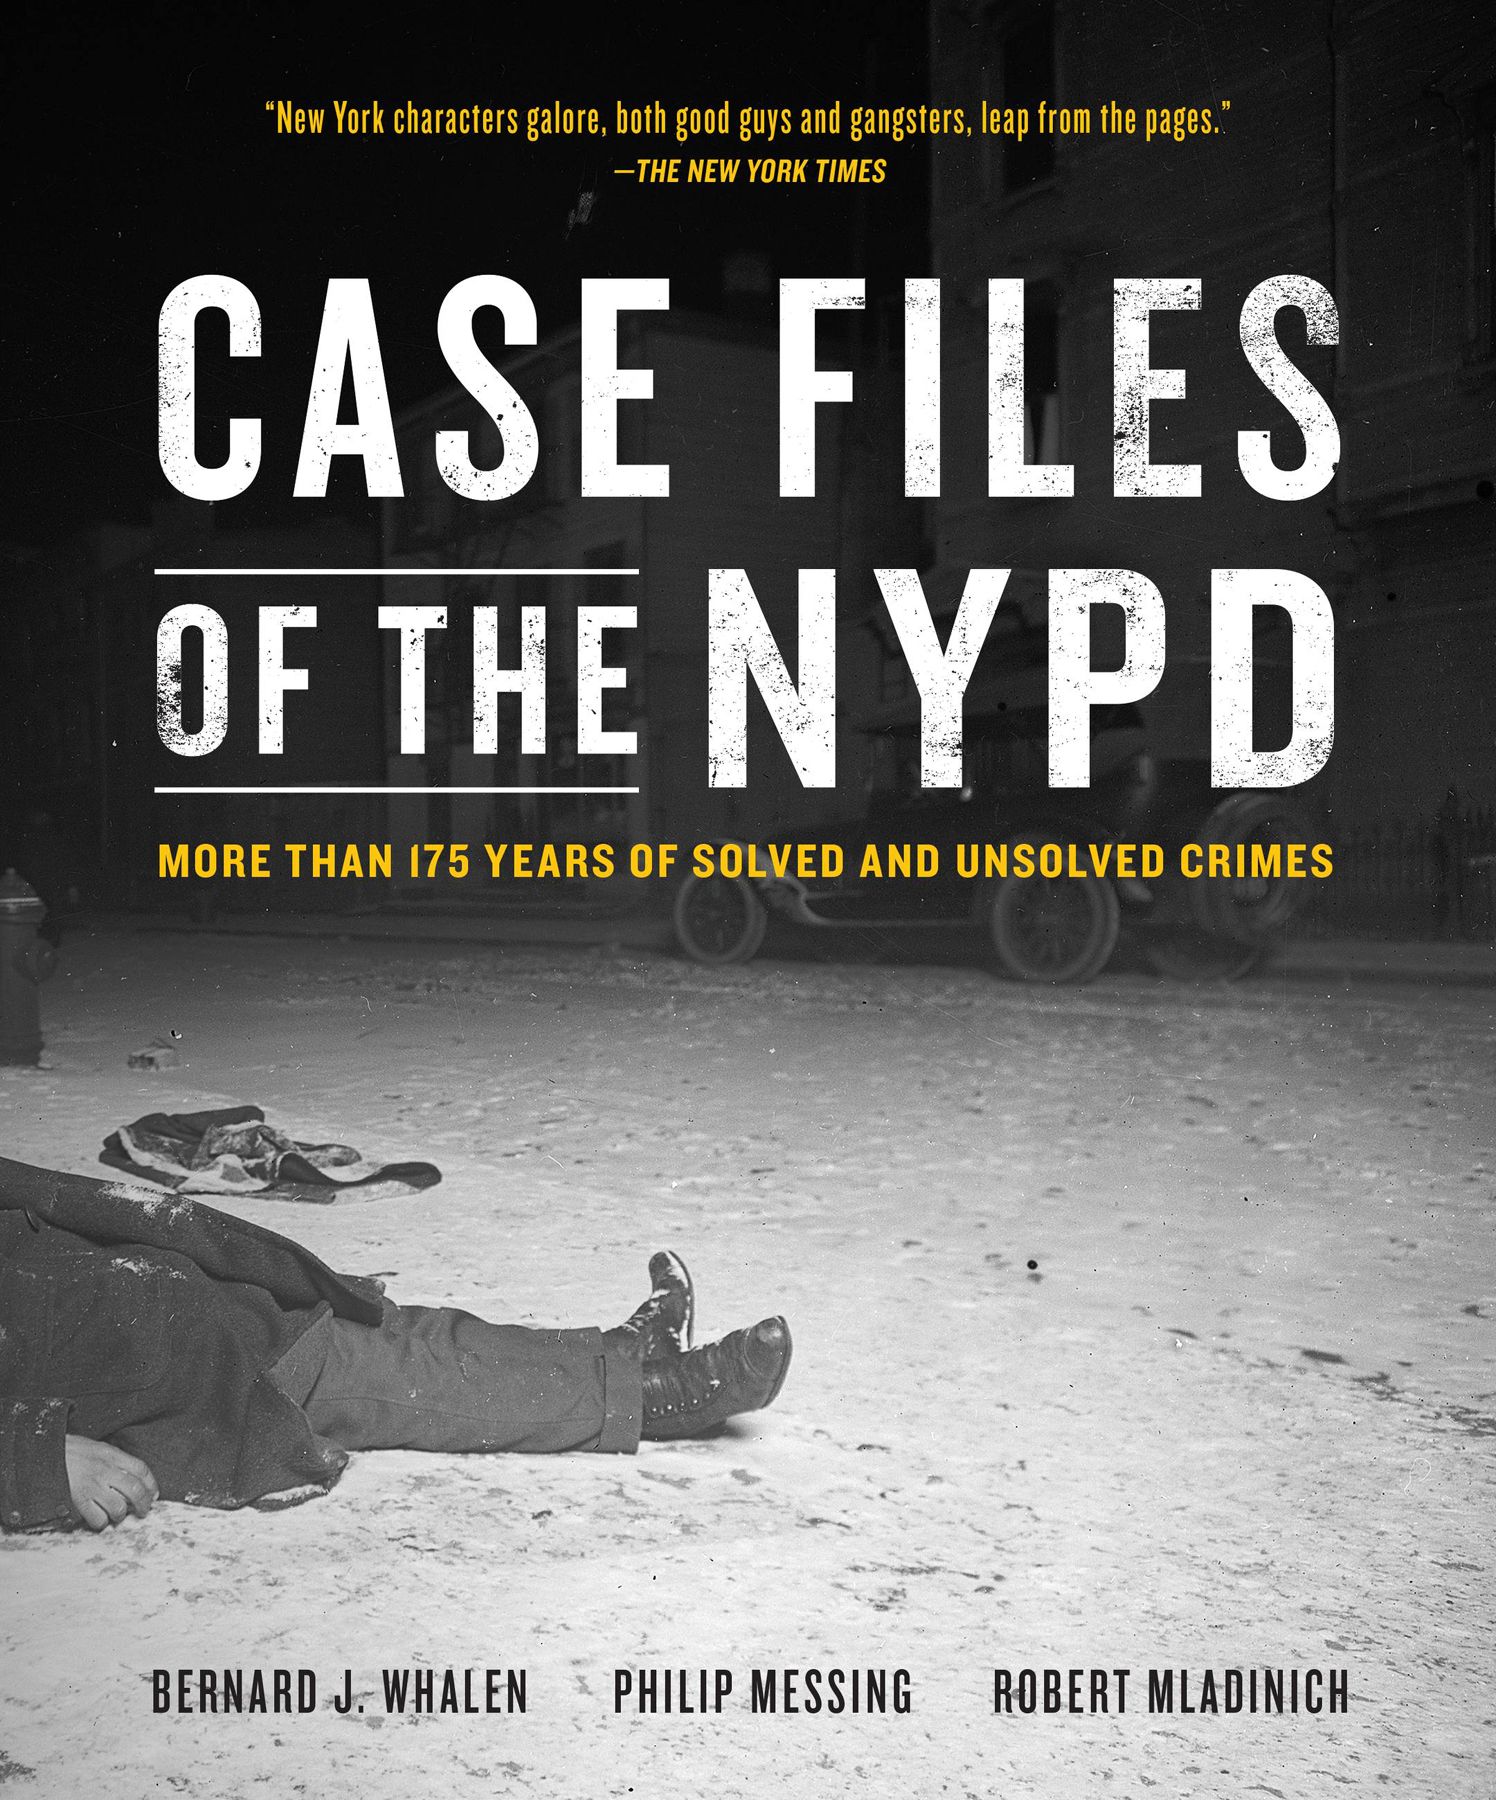 Case Files of the NYPD More than 175 Years of Solved and Unsolved
Crimes Epub-Ebook